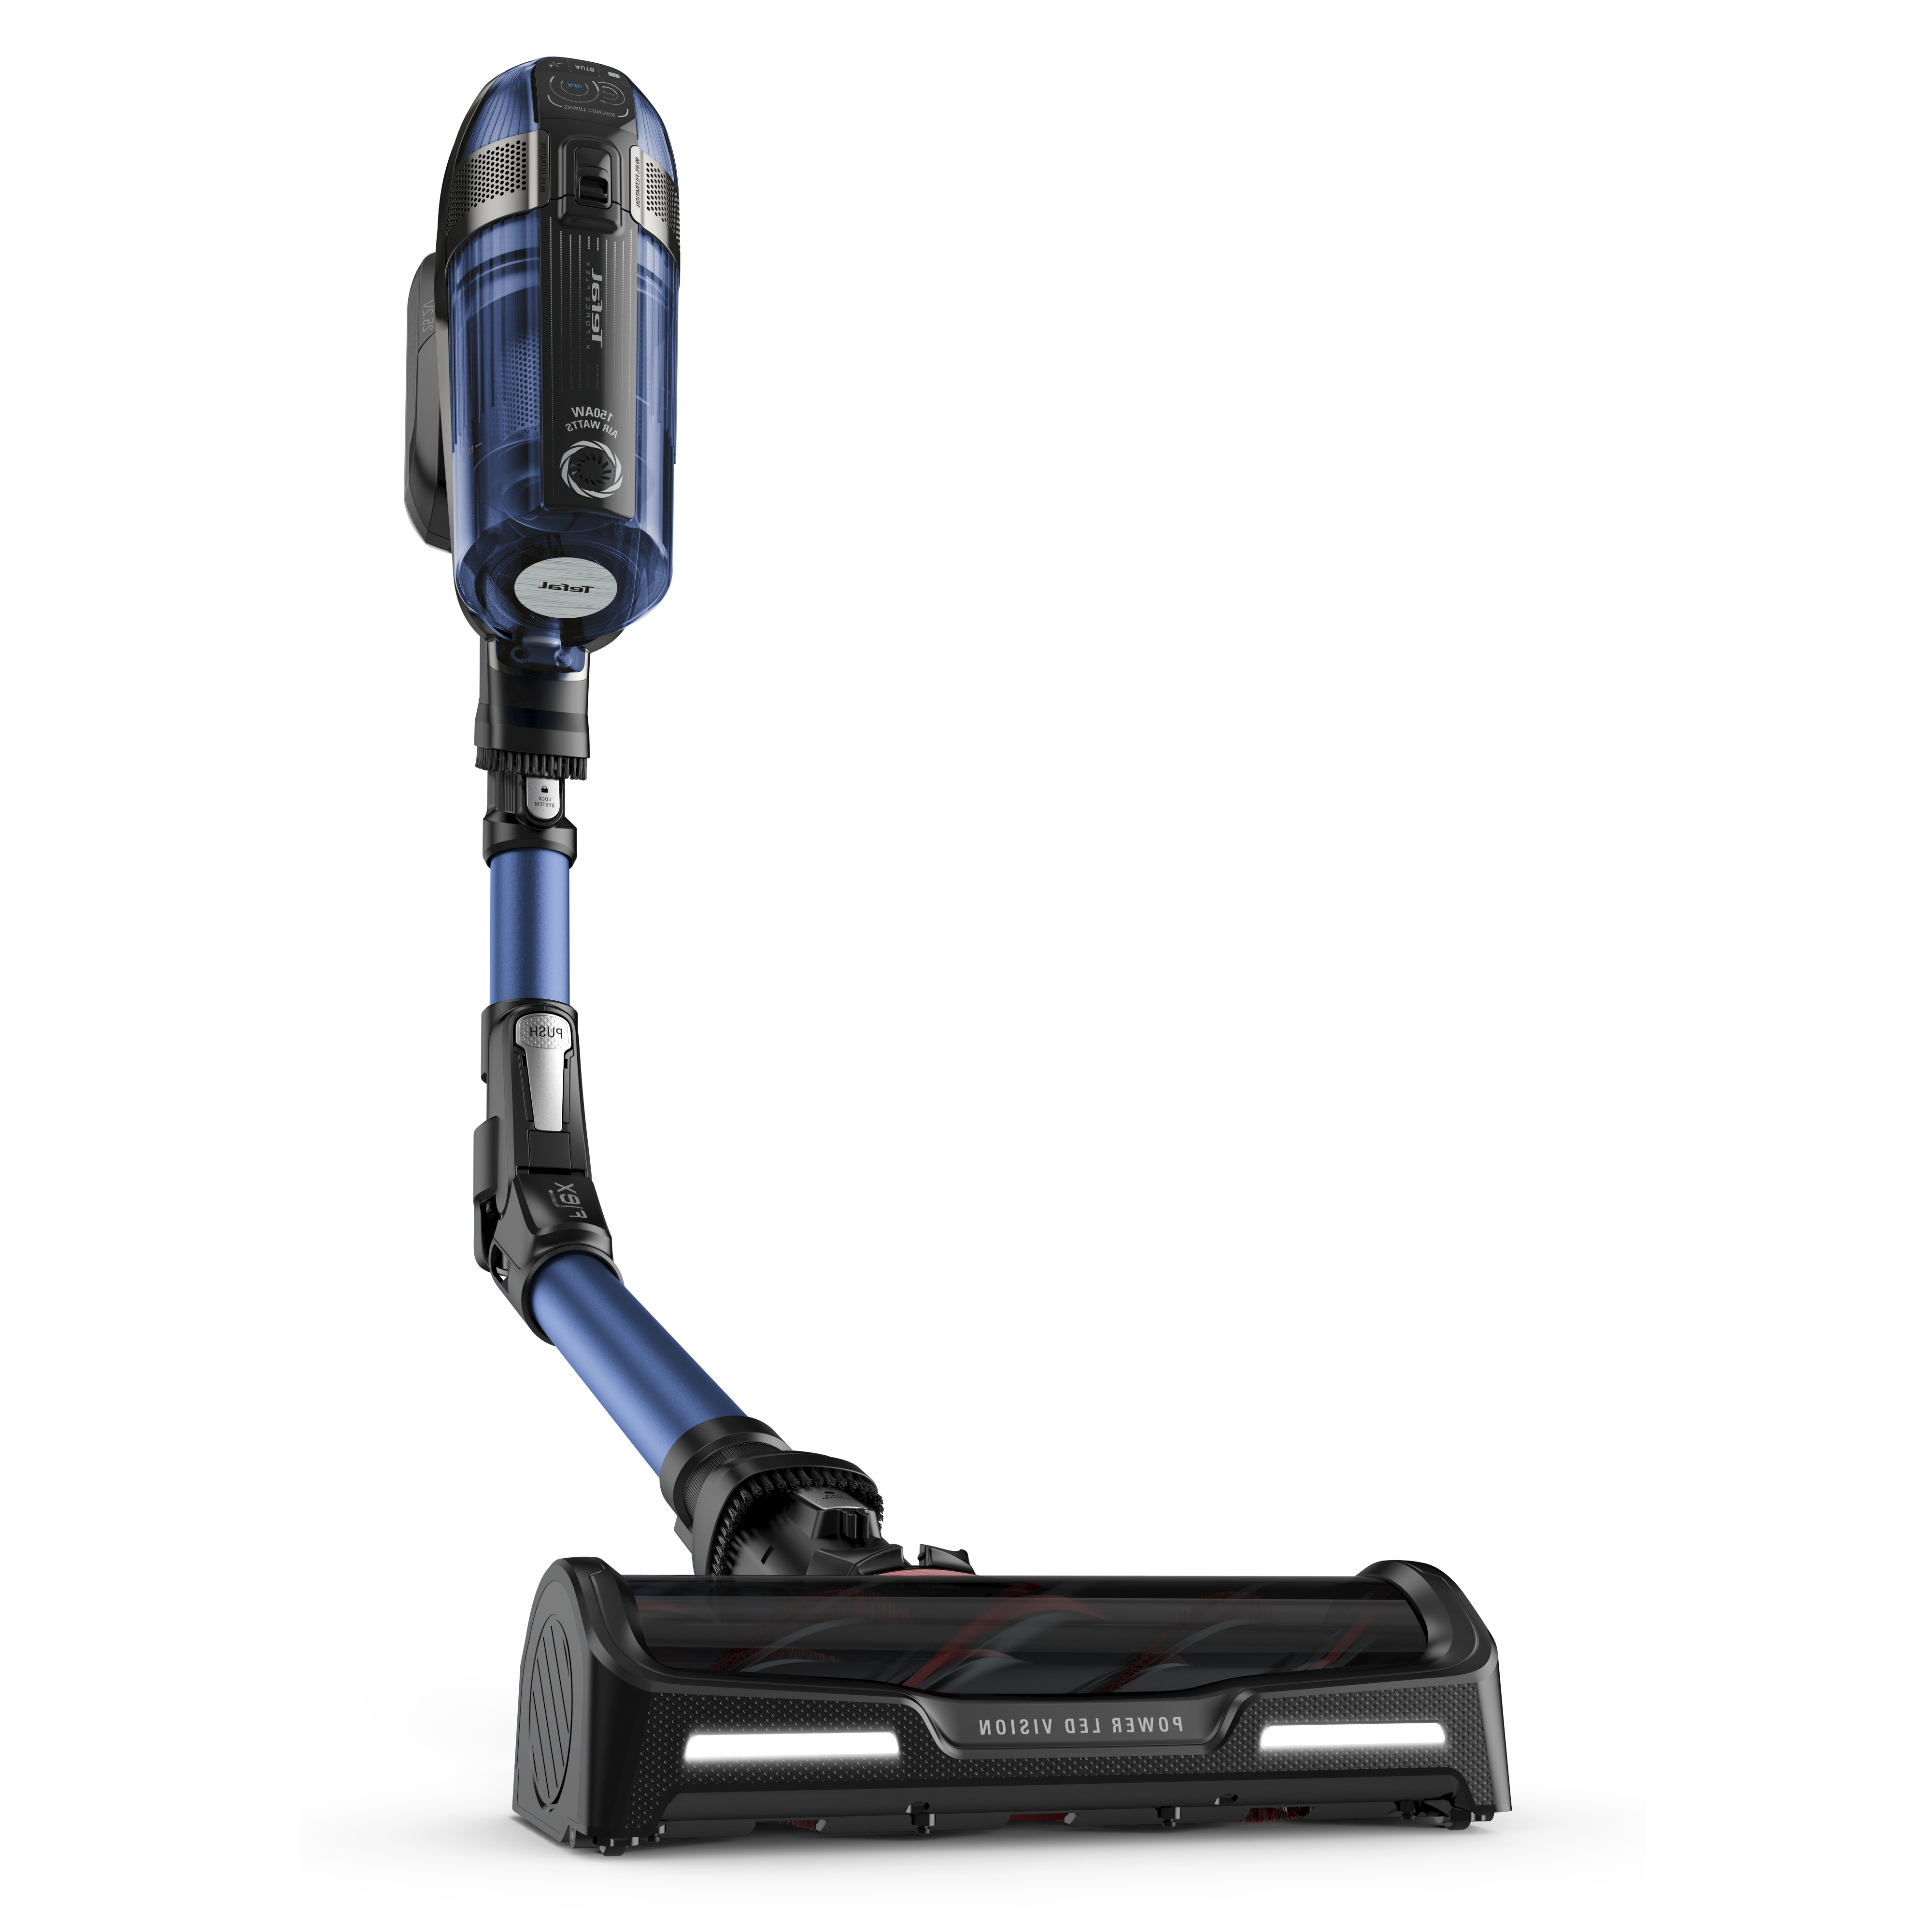 X-Force Flex, simply the best cleaning X-perience by Tefal